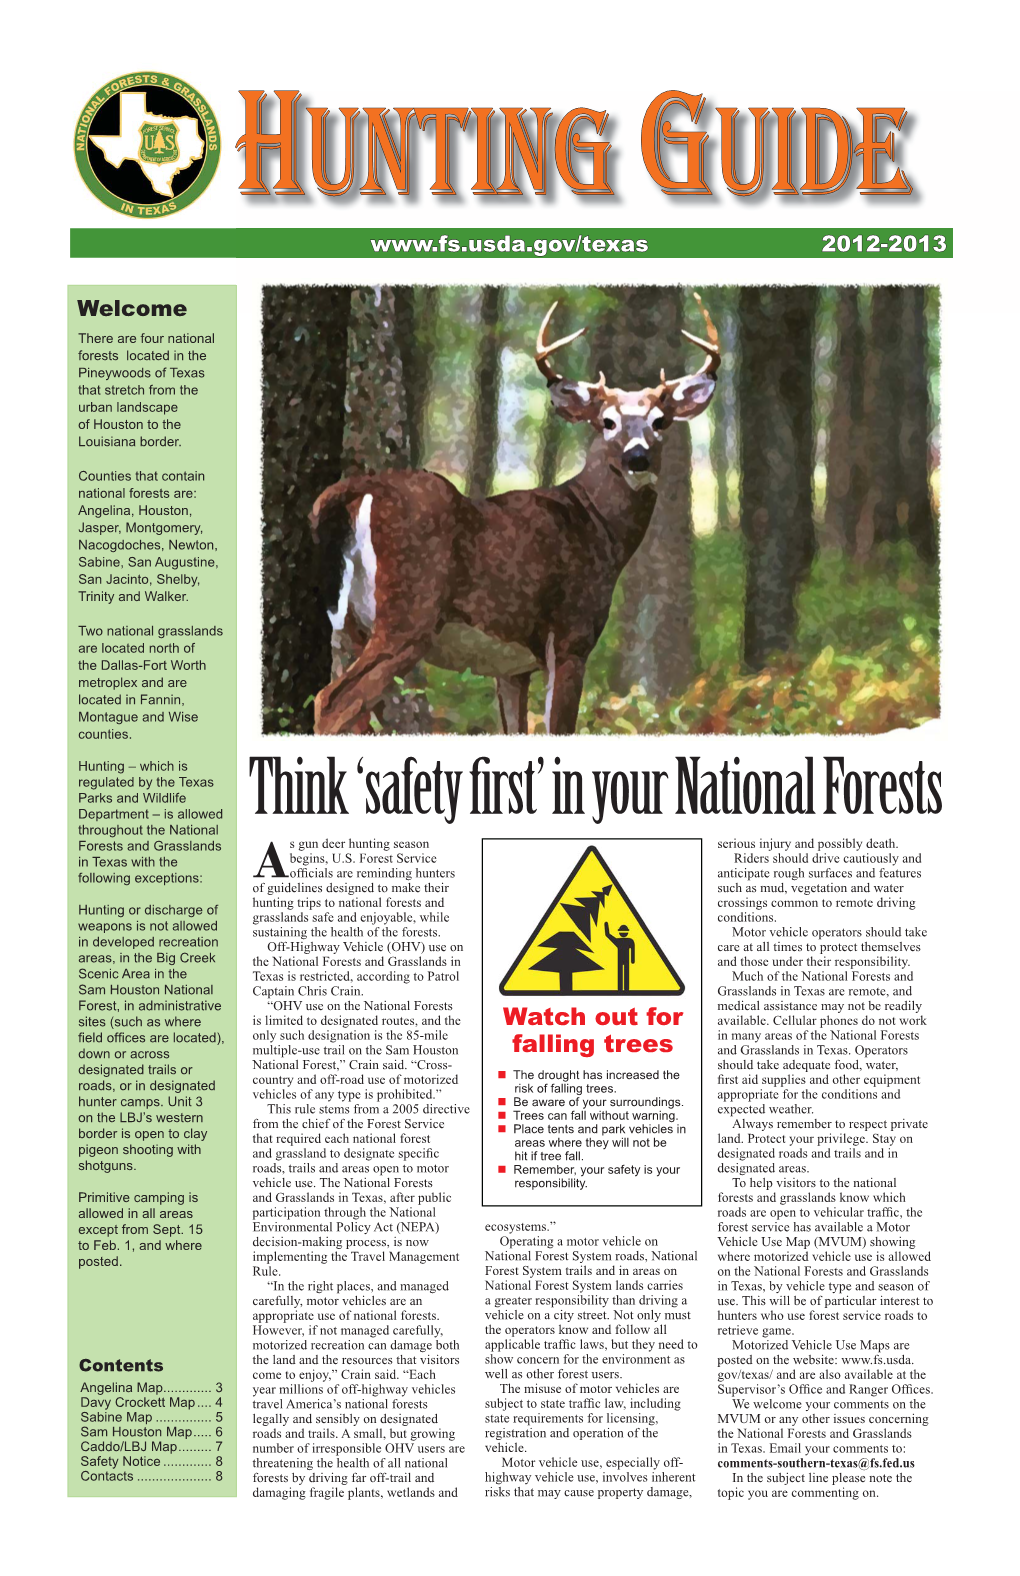 In Your National Forests Throughout the National Forests and Grasslands S Gun Deer Hunting Season Serious Injury and Possibly Death